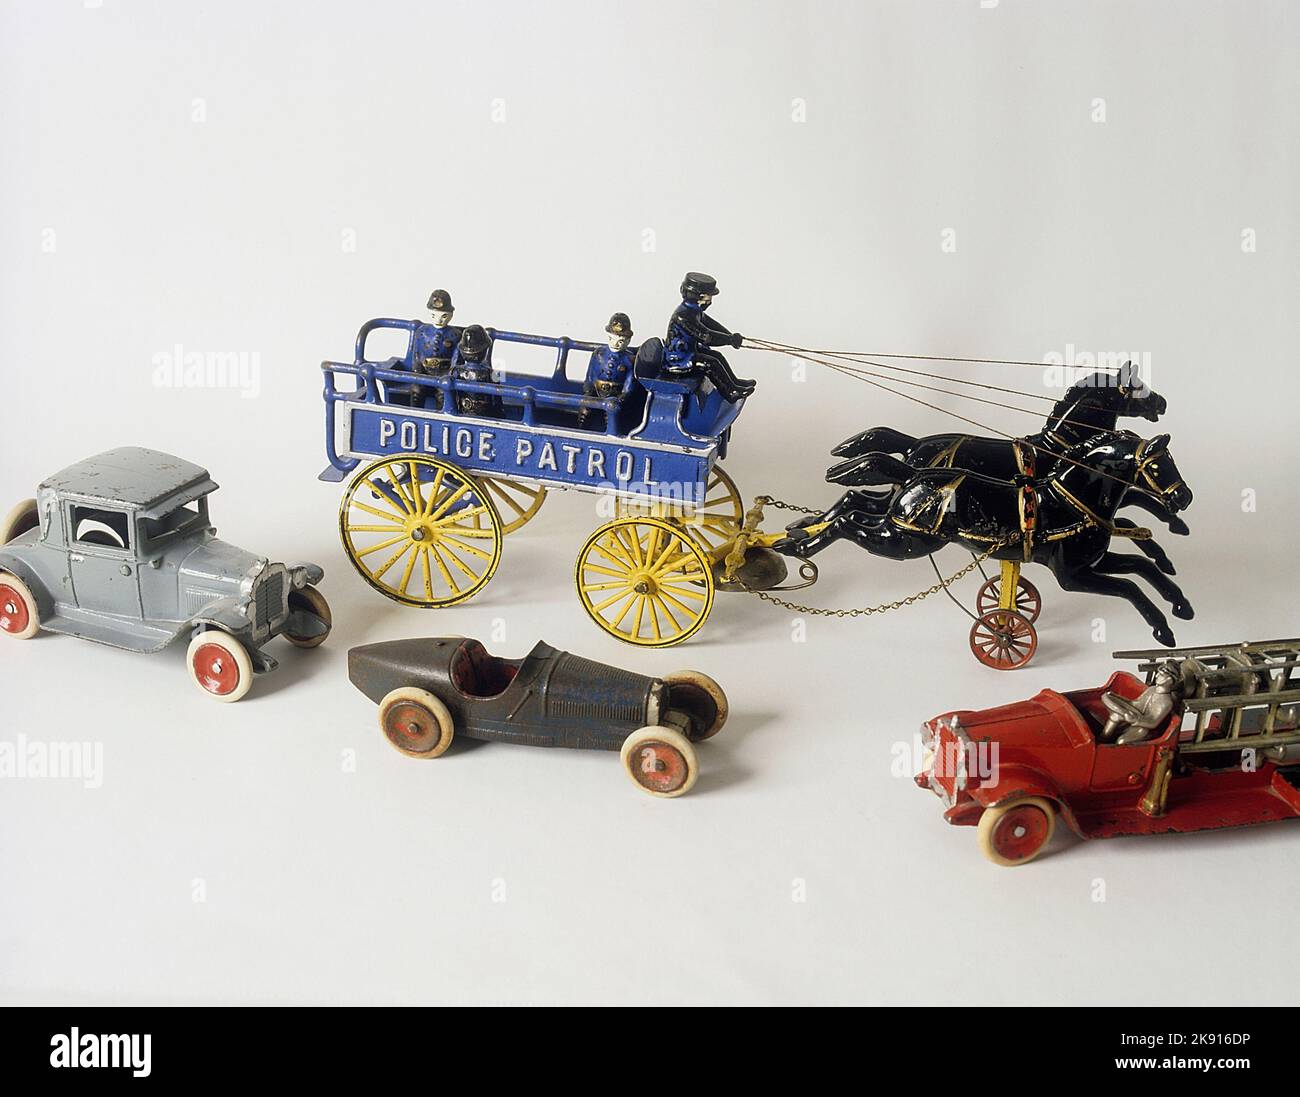 Childrens toys from the past. A cast iron toy made in USA with two horses pulling a police patrol wagon. Simple but fun toys that were cheap to buy. They are now collectible and can be very valuable. A Ford Coupe, a Alfa Romeo racing car and a firetruck in front. All cast iron toys. Stock Photo